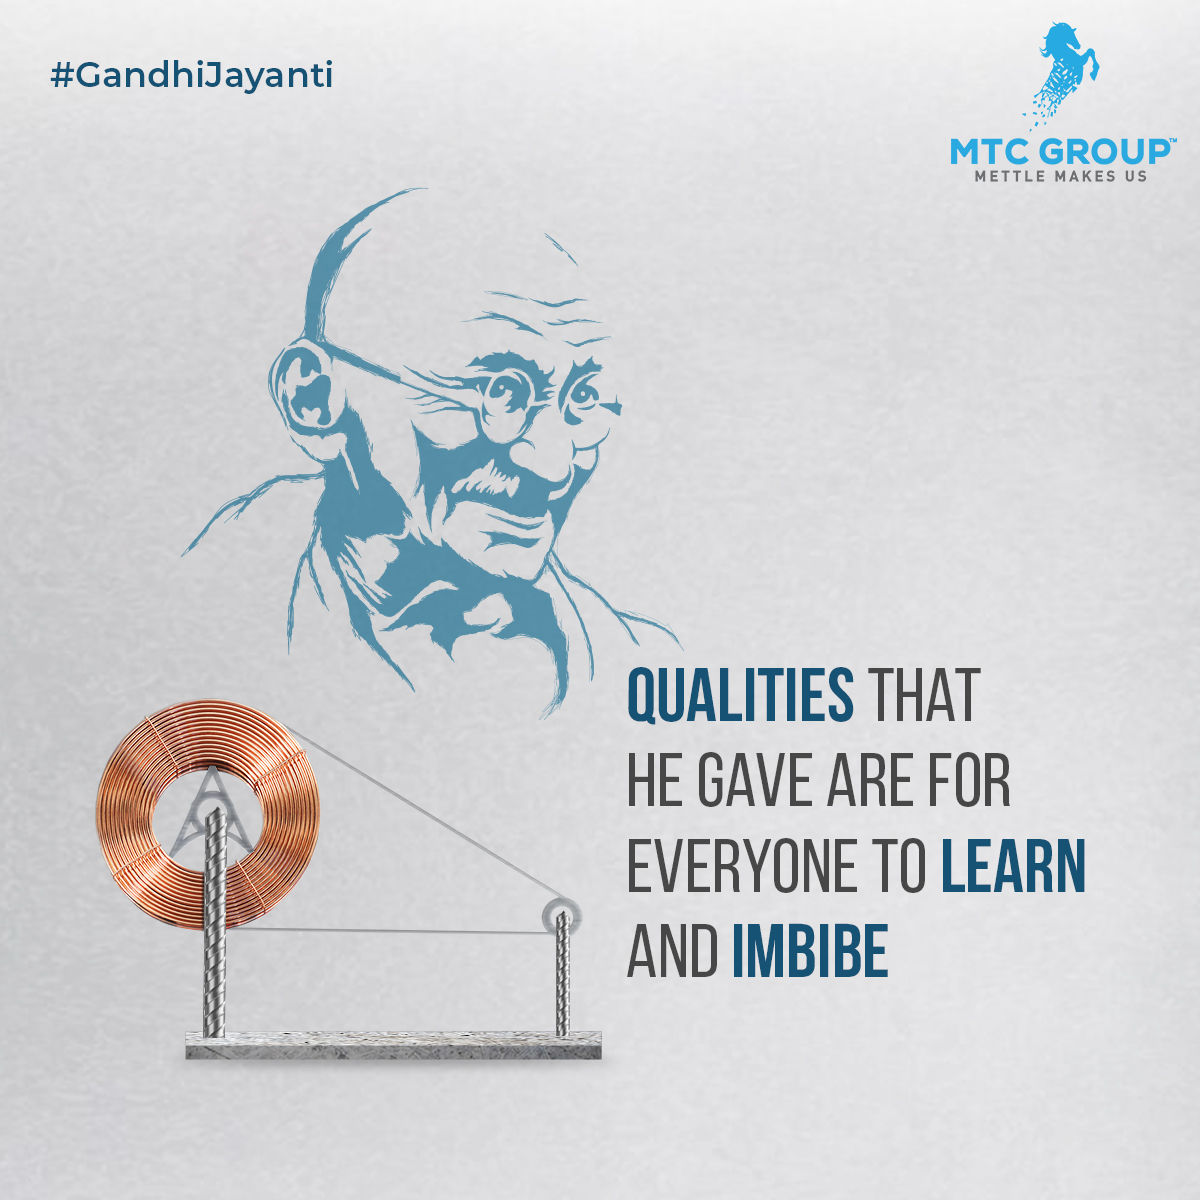 Celebrating the Legacy of the Father of Our Nation, Who Laid the Strong Foundation for Our Future. Happy Gandhi Jayanti! #HappyGandhiJayanti #Gandhiji #GandhiBapu #MTCGroup #ScrapMetal #Recycling #MetalRecycling #Metal #Copper #Ferrous #NonFerrous #Aluminum #Steel